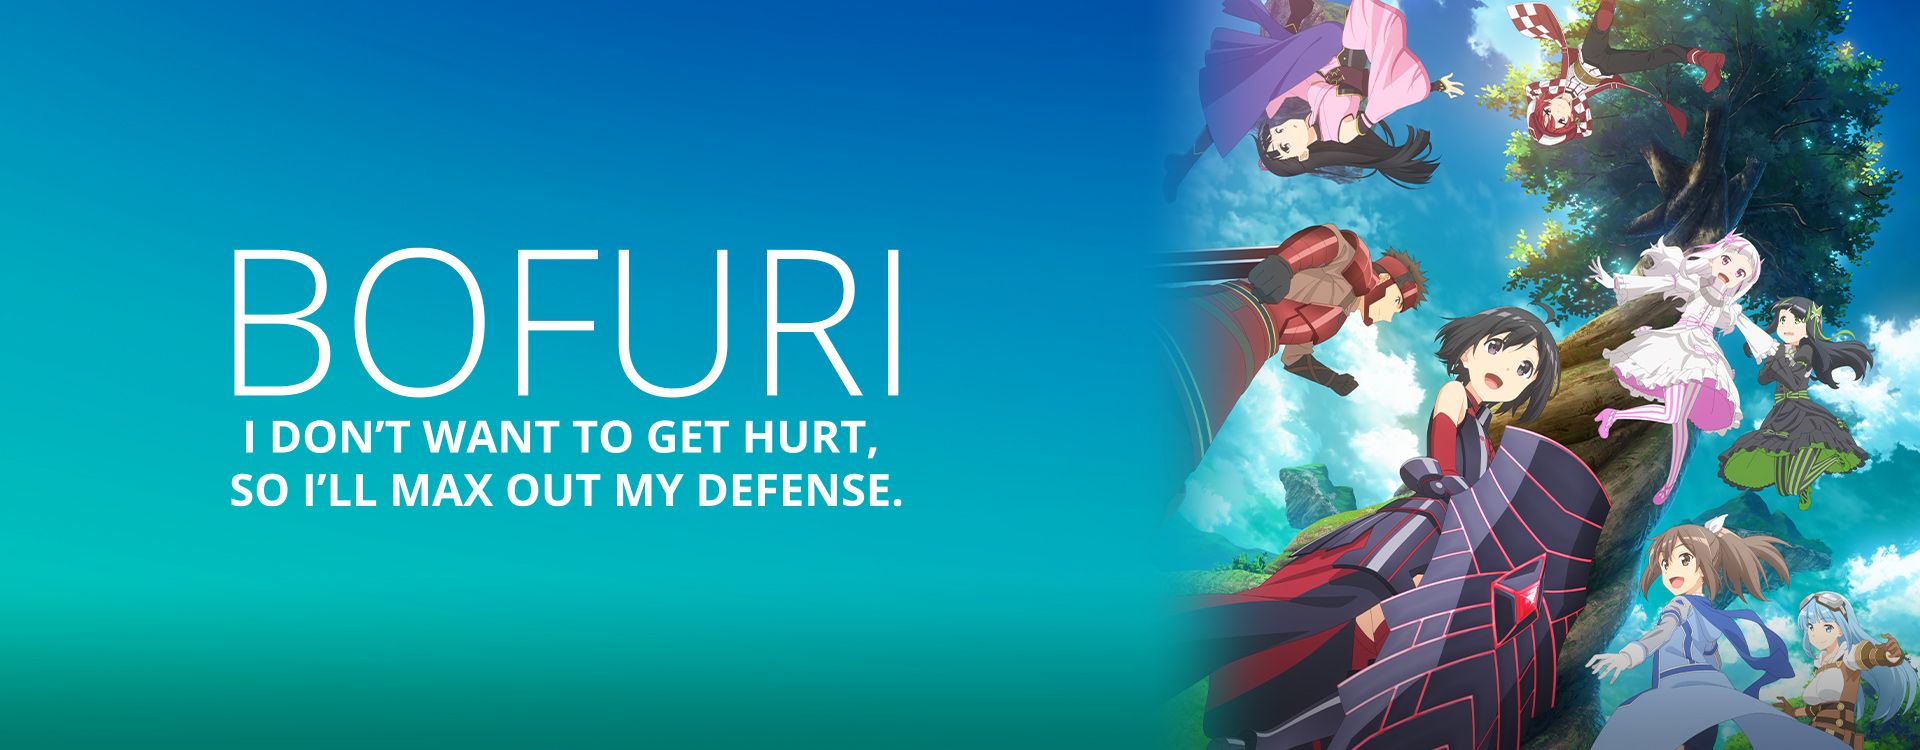 Watch Bofuri: I Don'T Want To Get Hurt, So I'Ll Max Out My Defense. Sub & Dub. Action Adventure, Comedy, Fantasy, Sci Fi Anime